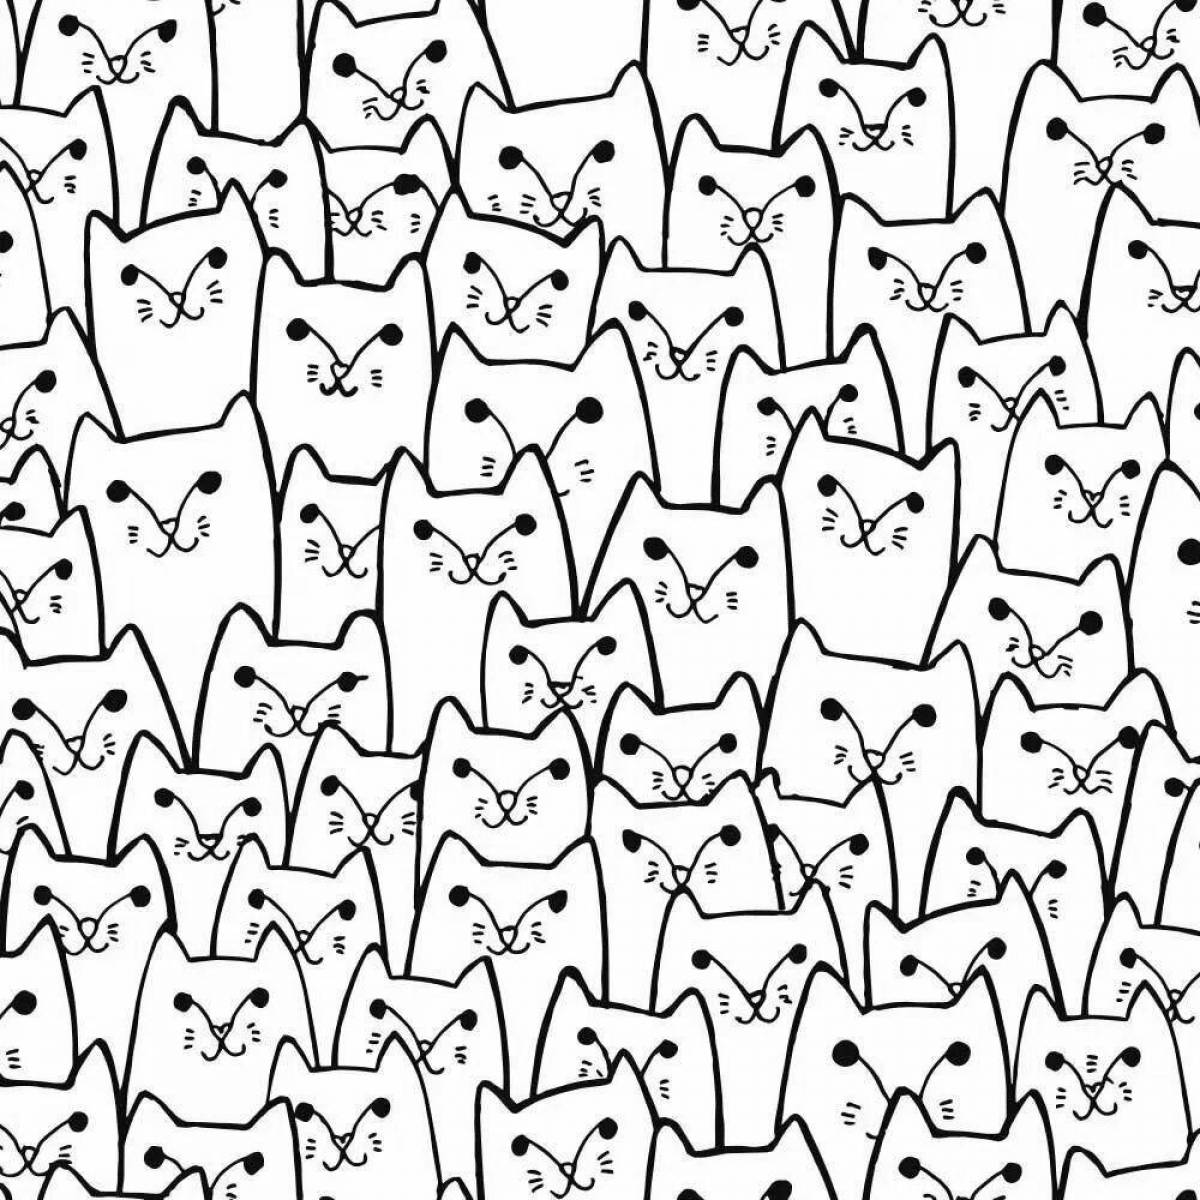 Animated coloring book with lots of cats